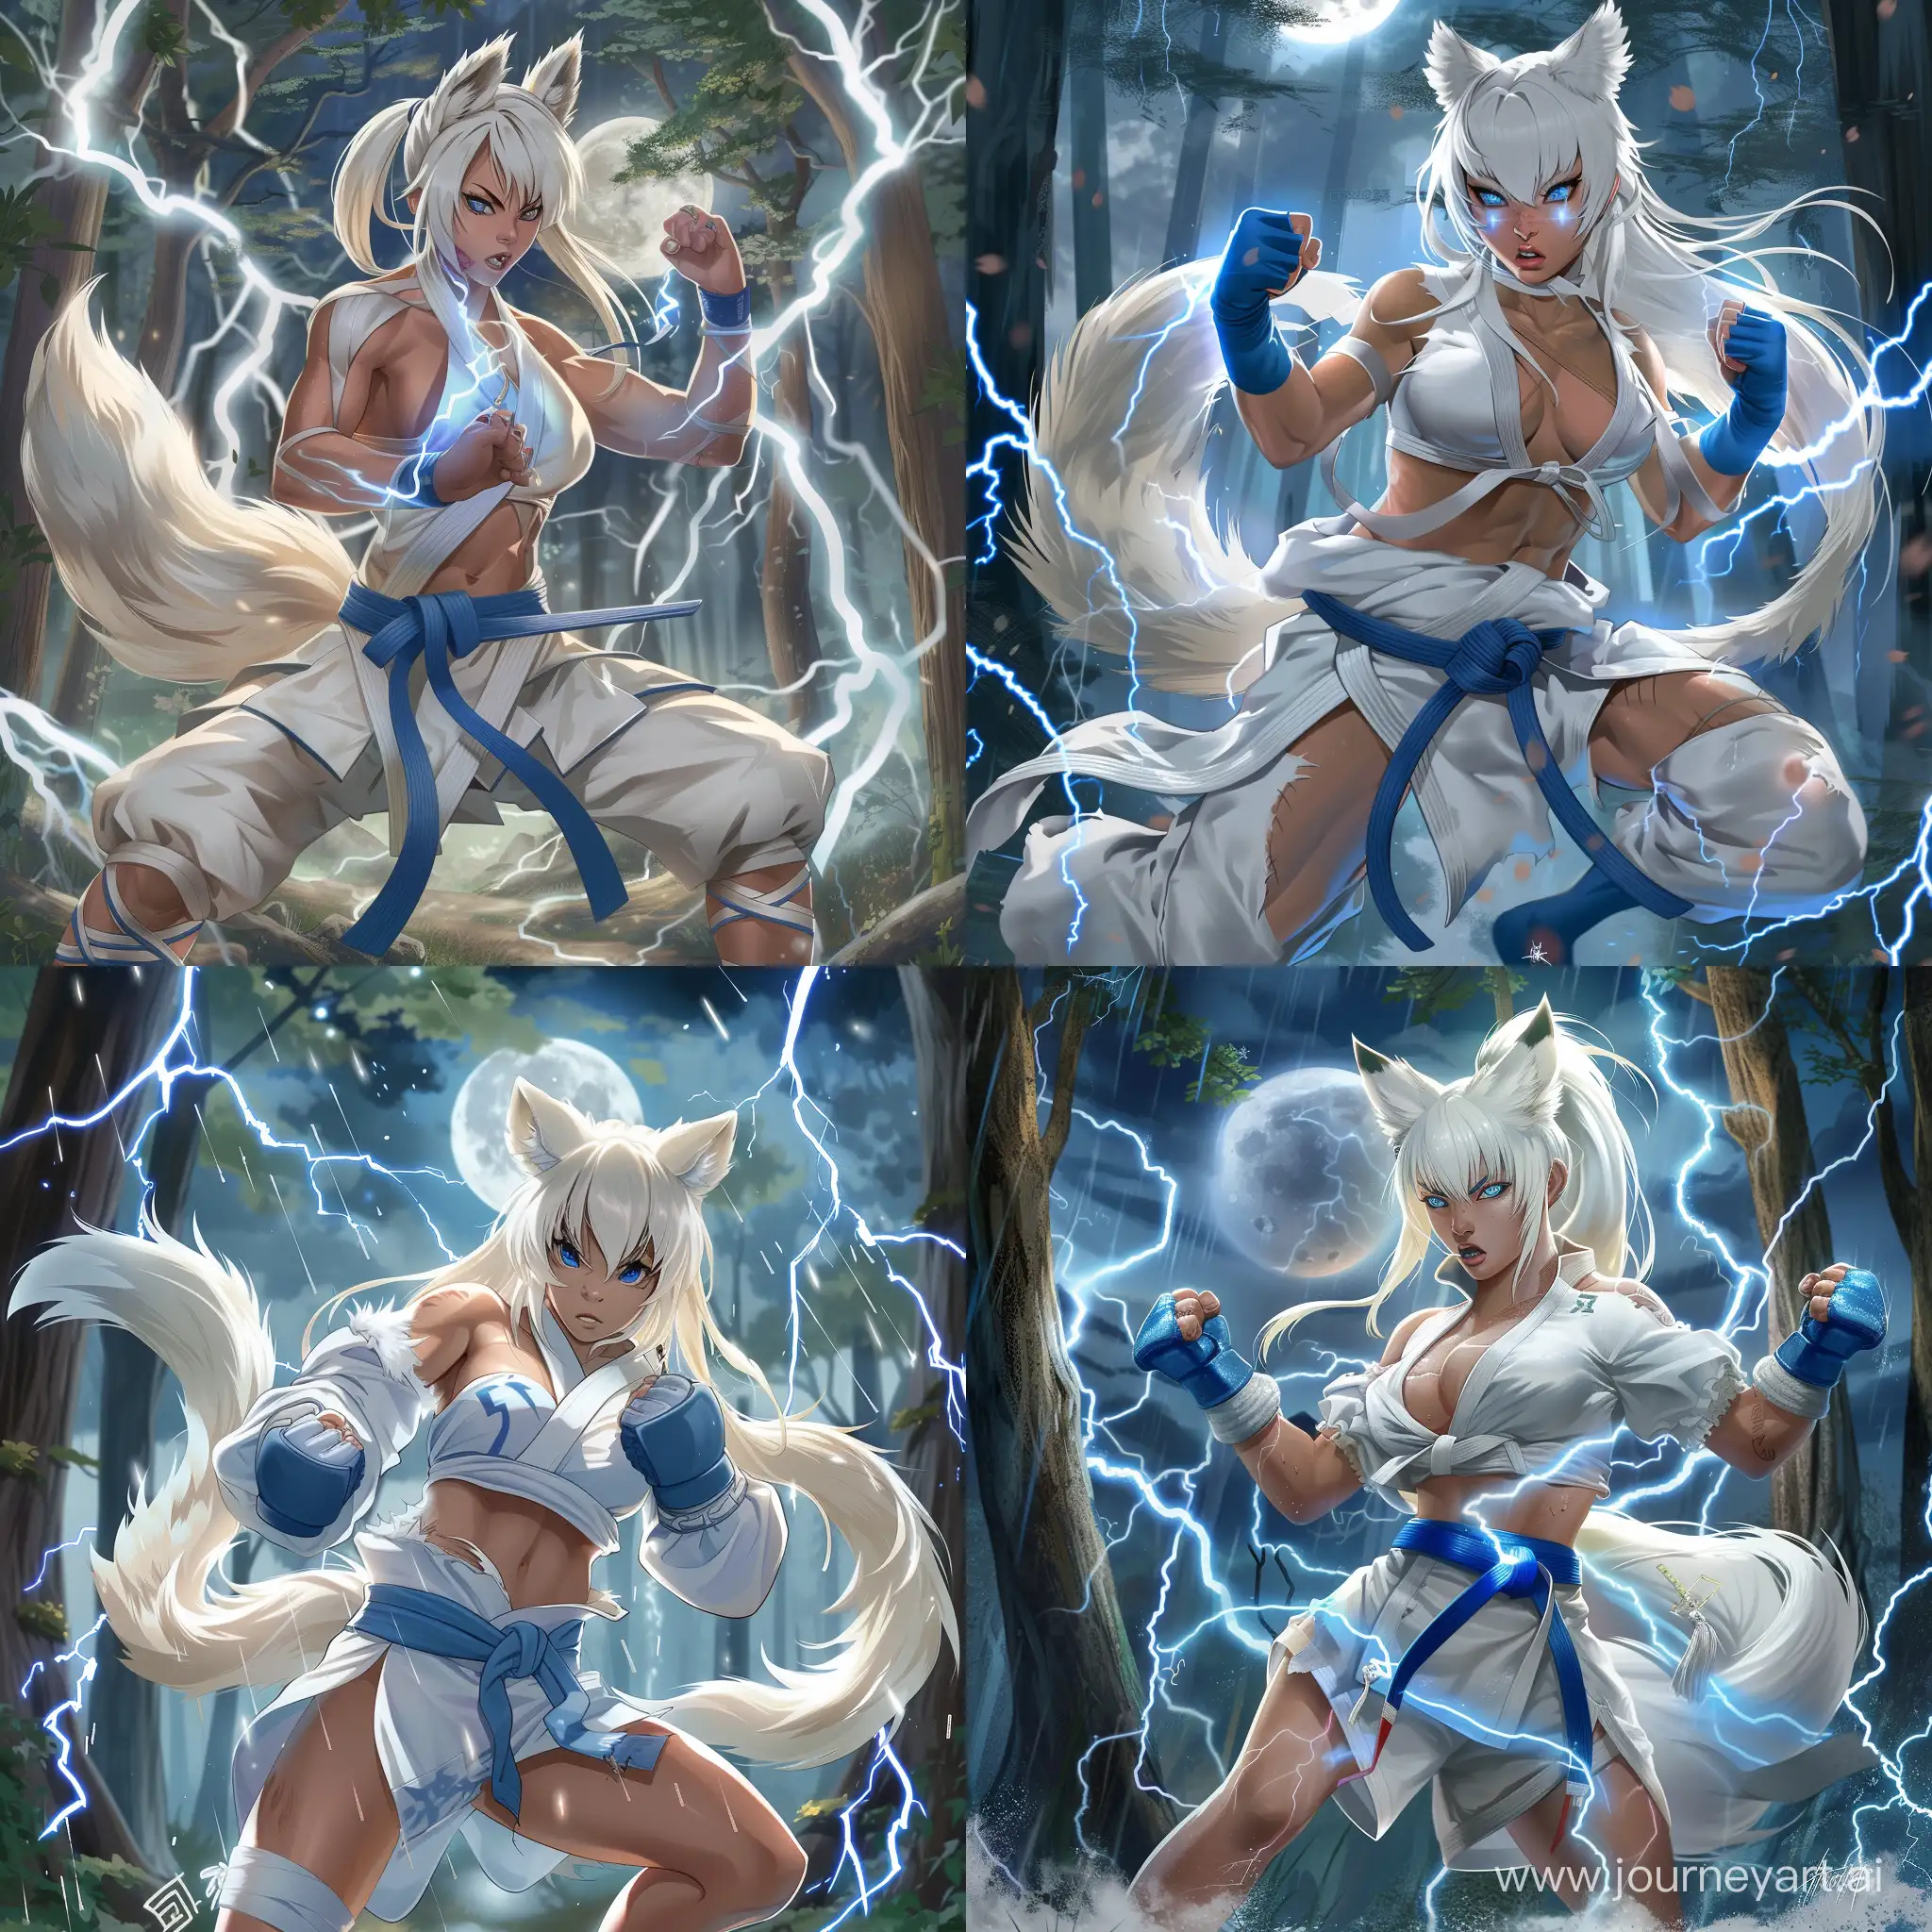 anime-style, full body, athletic, muscular, tan skin, adult, asian woman, long white hair, white fox ears, white fox tail attached to her waist, fierce blue eyes, wearing a white and blue martial arts gi, white chestwrap, baggy white martial arts pants, dynamic, blue fistwraps, blue footwraps, using lightning magic, surrounded by lightning, forest, night, full moon